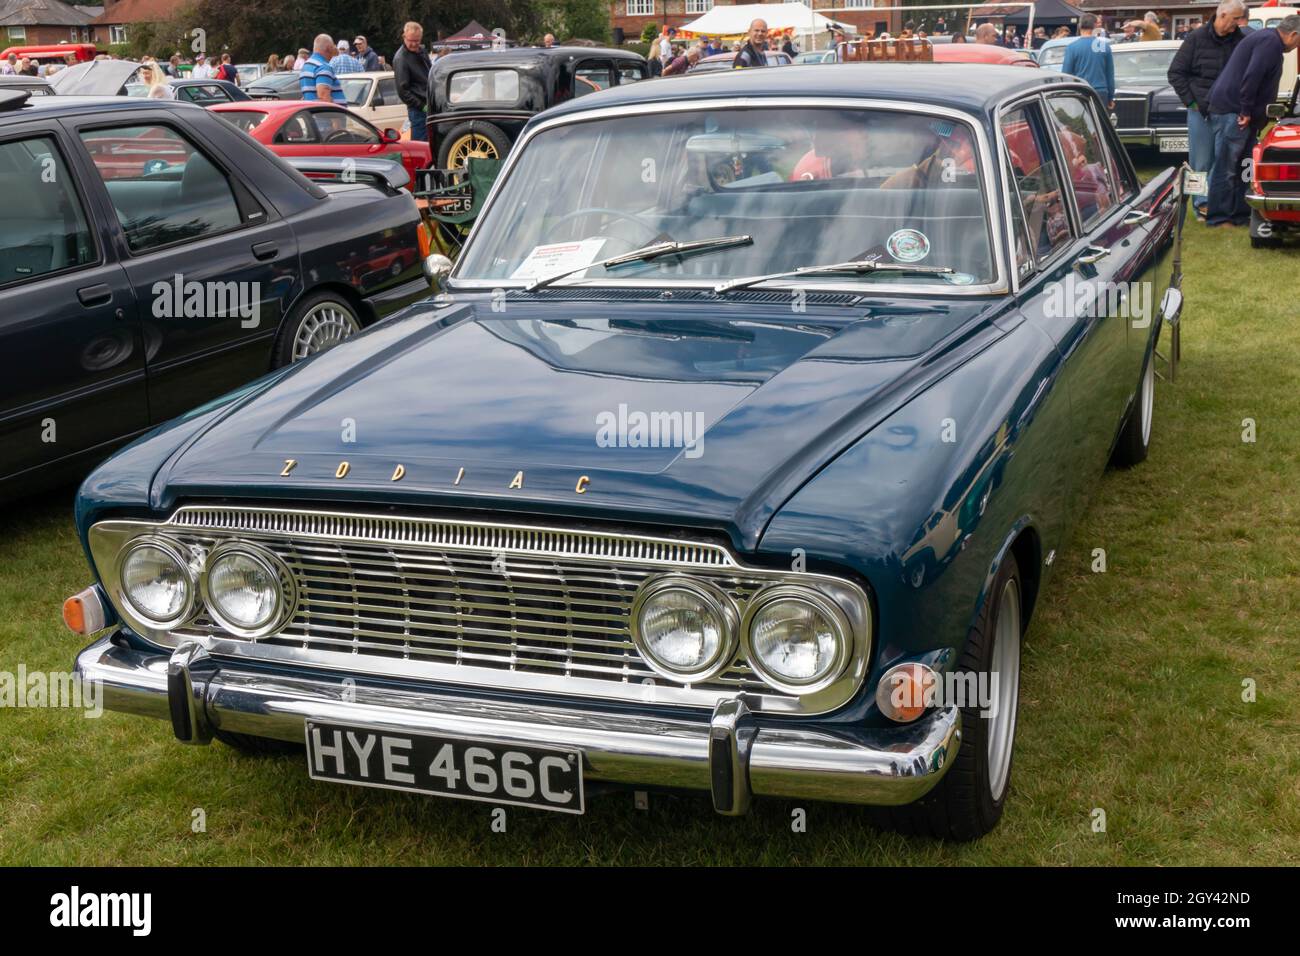 Naphill, England - August 29th 2021: A blue Ford Zodiac Mark 3 Saloon.. The car was built between 1962 and 1966. Stock Photo